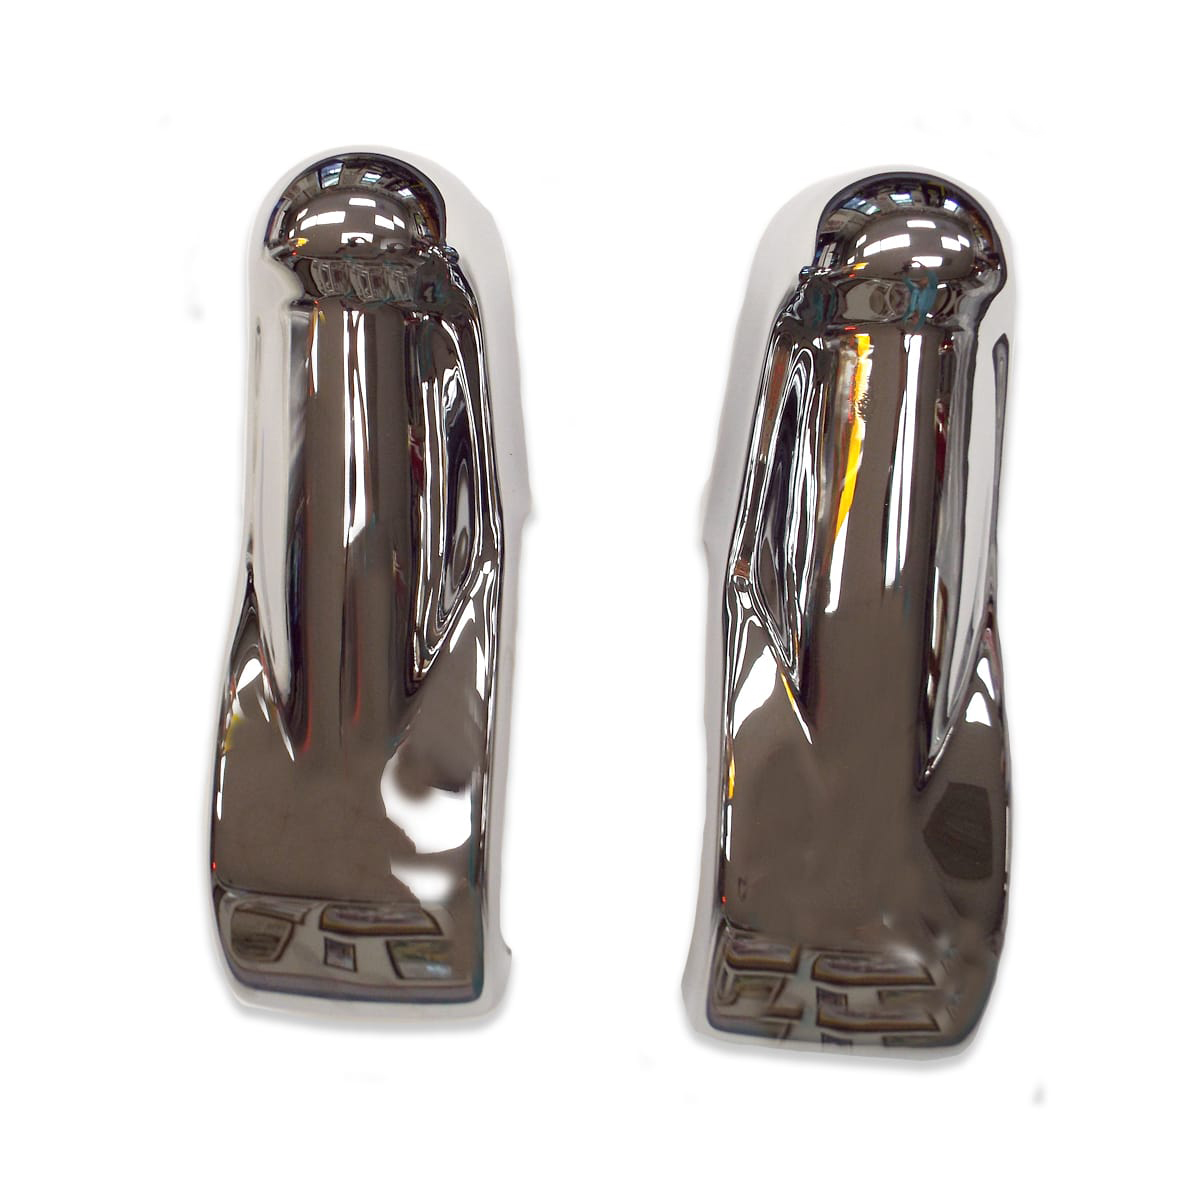 1960-1962 Bumper Guards Quality Chromed Heavy Steel Forging Chevrolet and GMC Pickup Truck